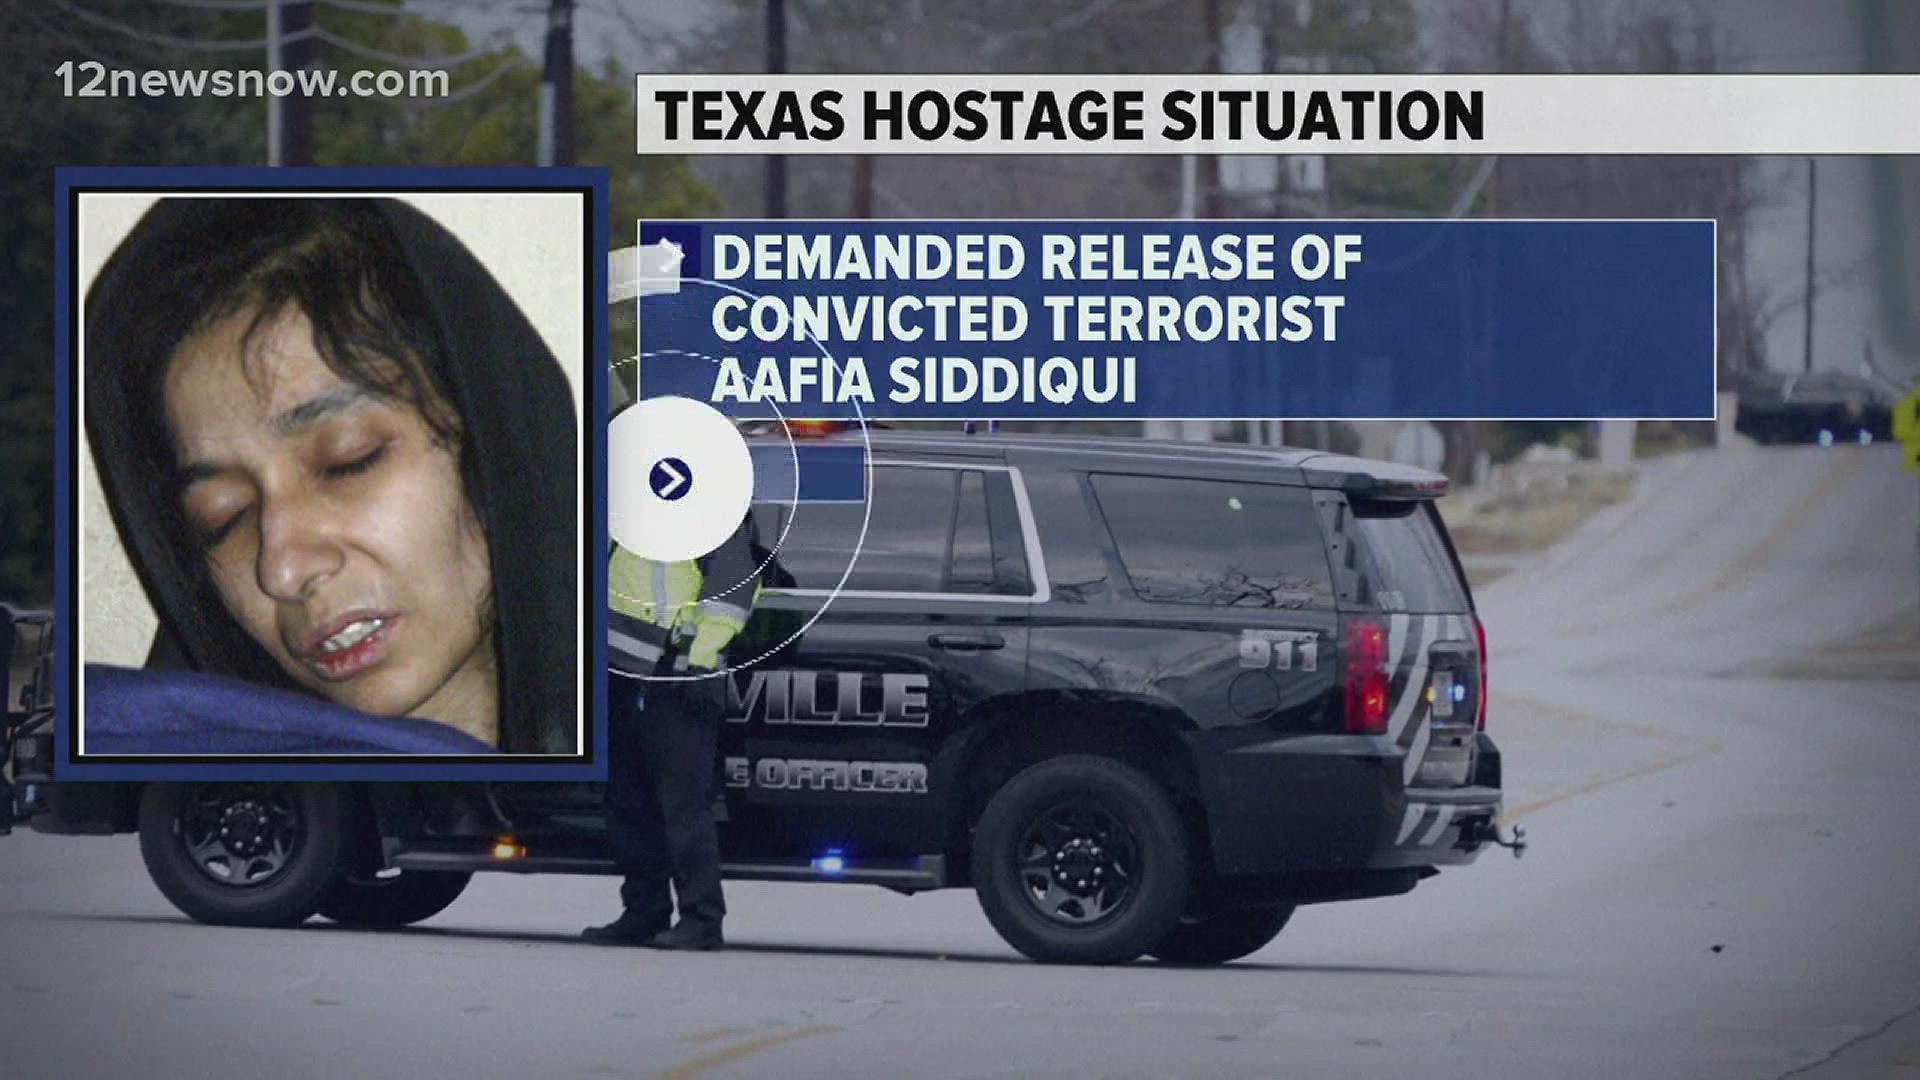 The person that the suspect demanded be released was Aafia Siddiqui. Siddiqui was sentenced to 86 years in federal prison for the attempted murder of a U.S. soldier.